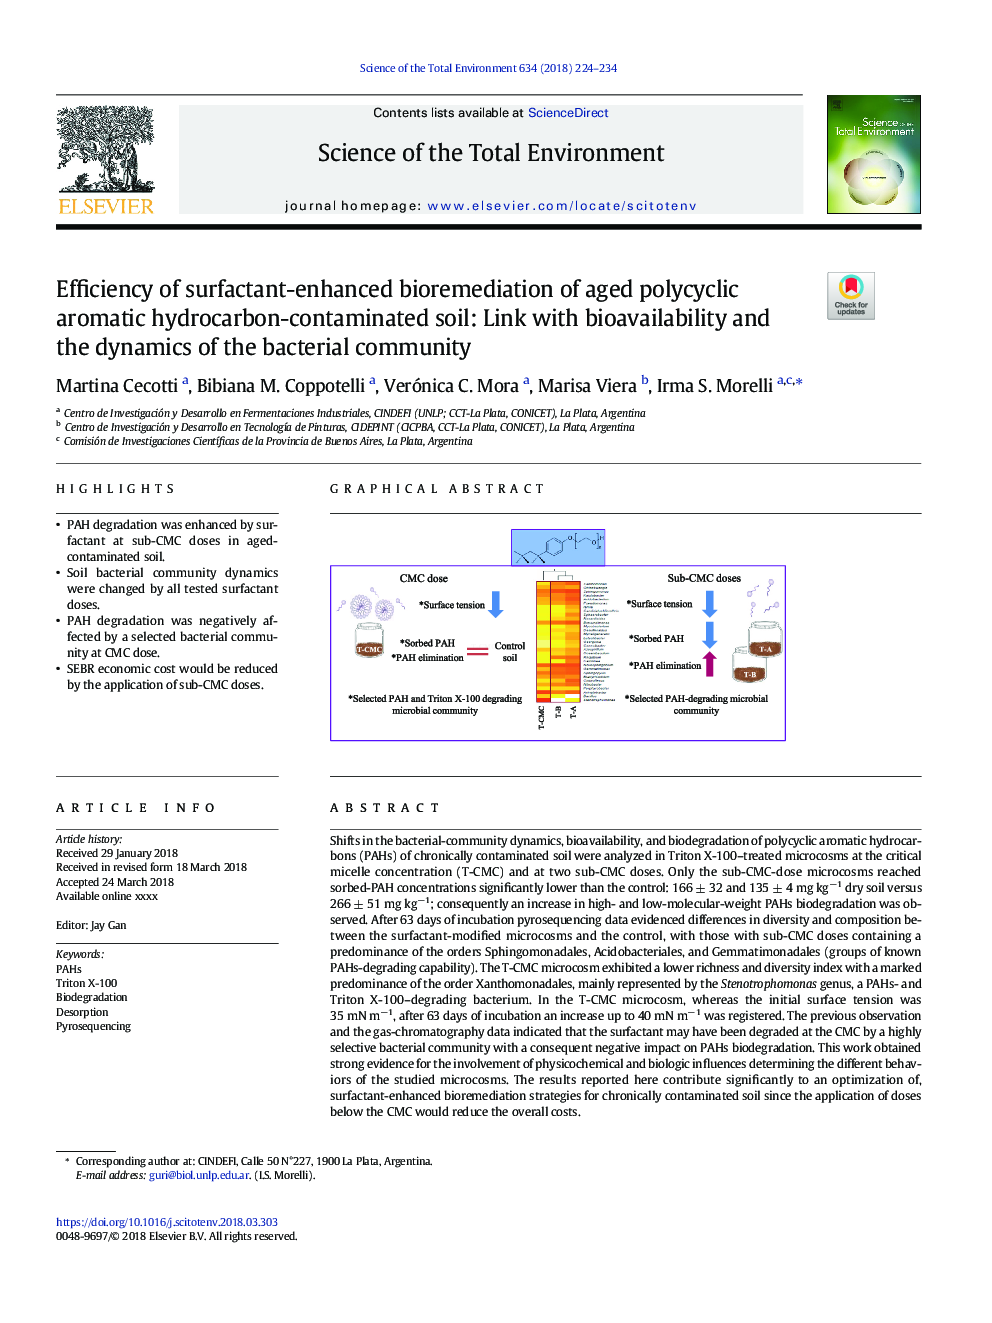 Efficiency of surfactant-enhanced bioremediation of aged polycyclic aromatic hydrocarbon-contaminated soil: Link with bioavailability and the dynamics of the bacterial community